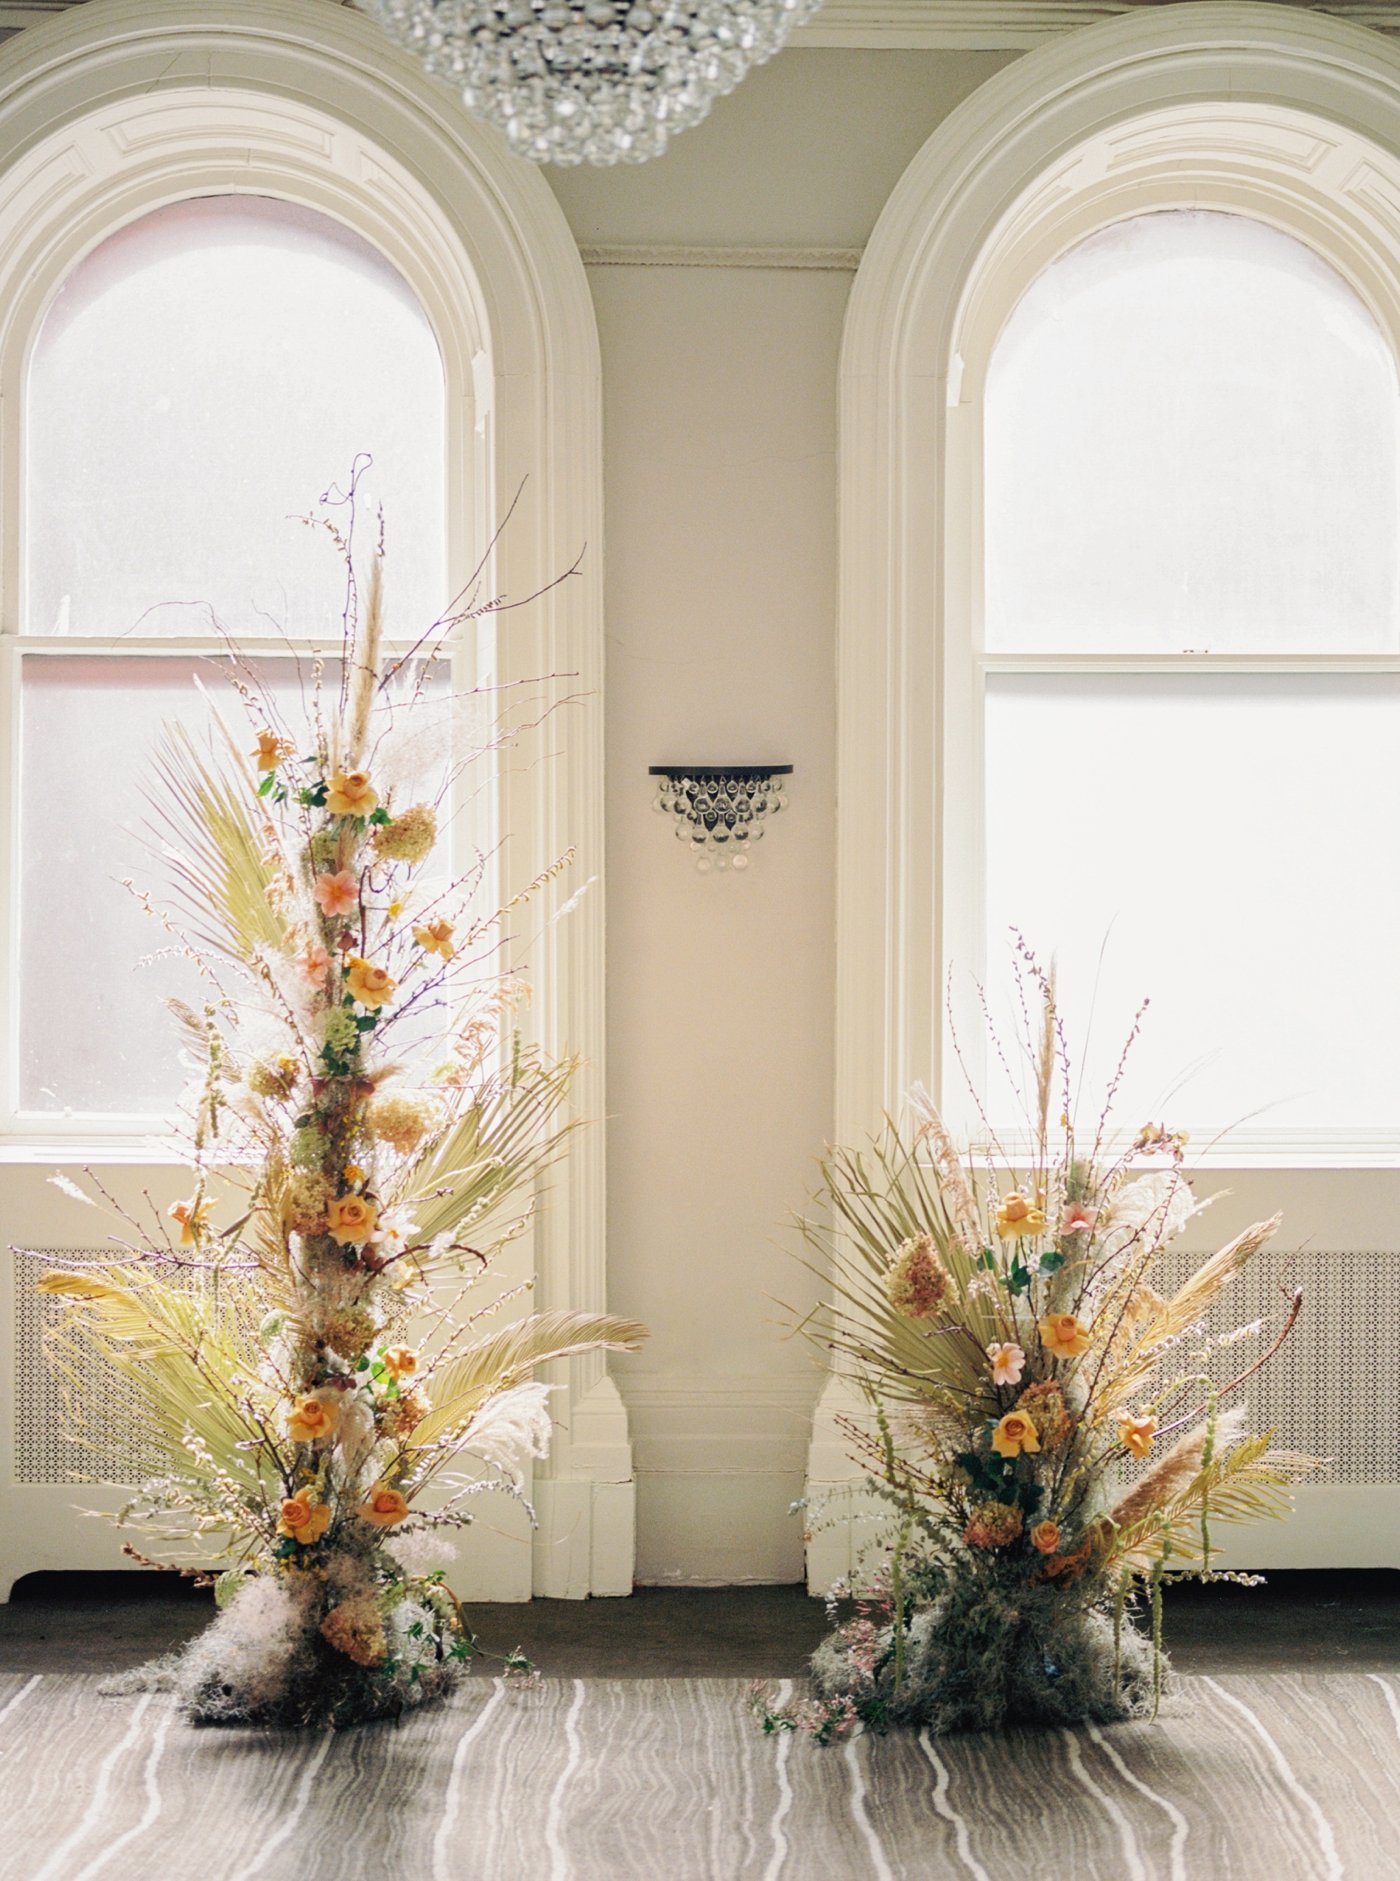 Broken arch wedding ceremony backdrop with peach roses, pampas grass, and dried palm leaves